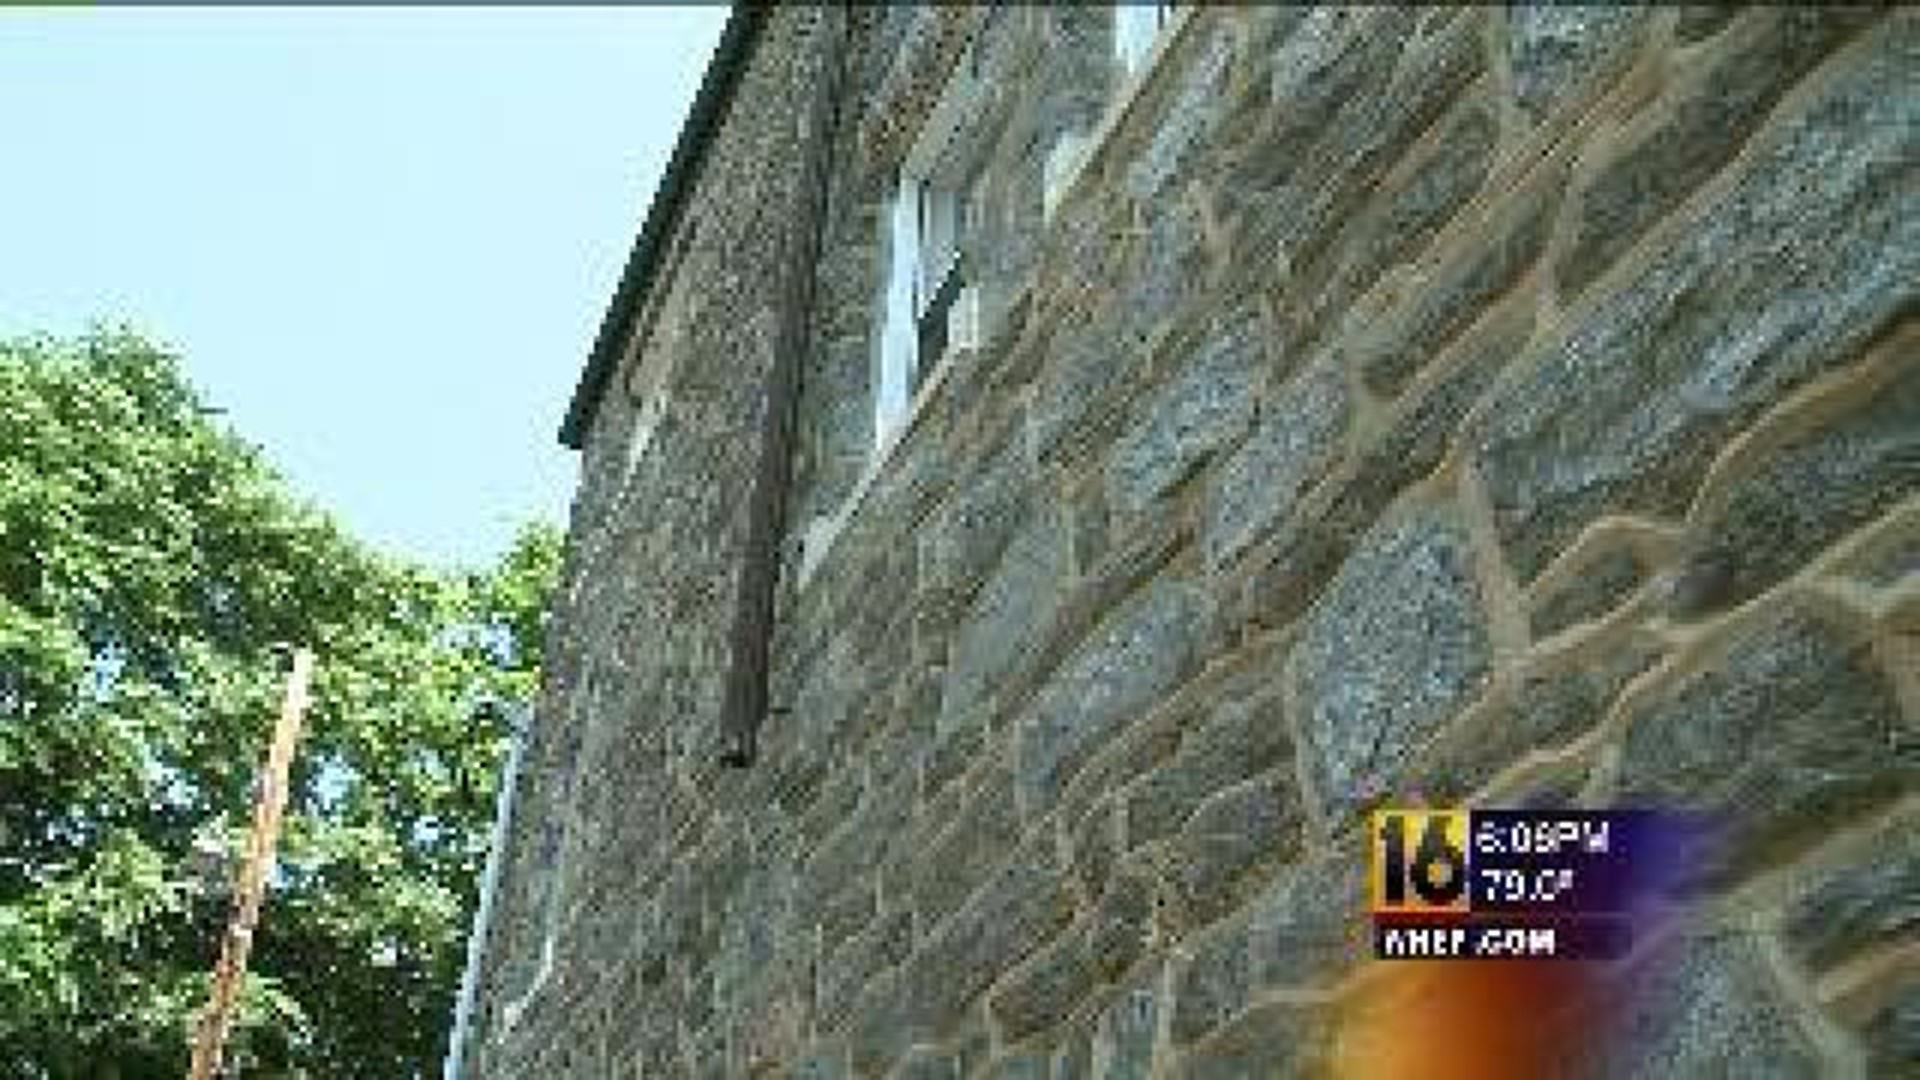 Theft at Schuylkill Haven Church